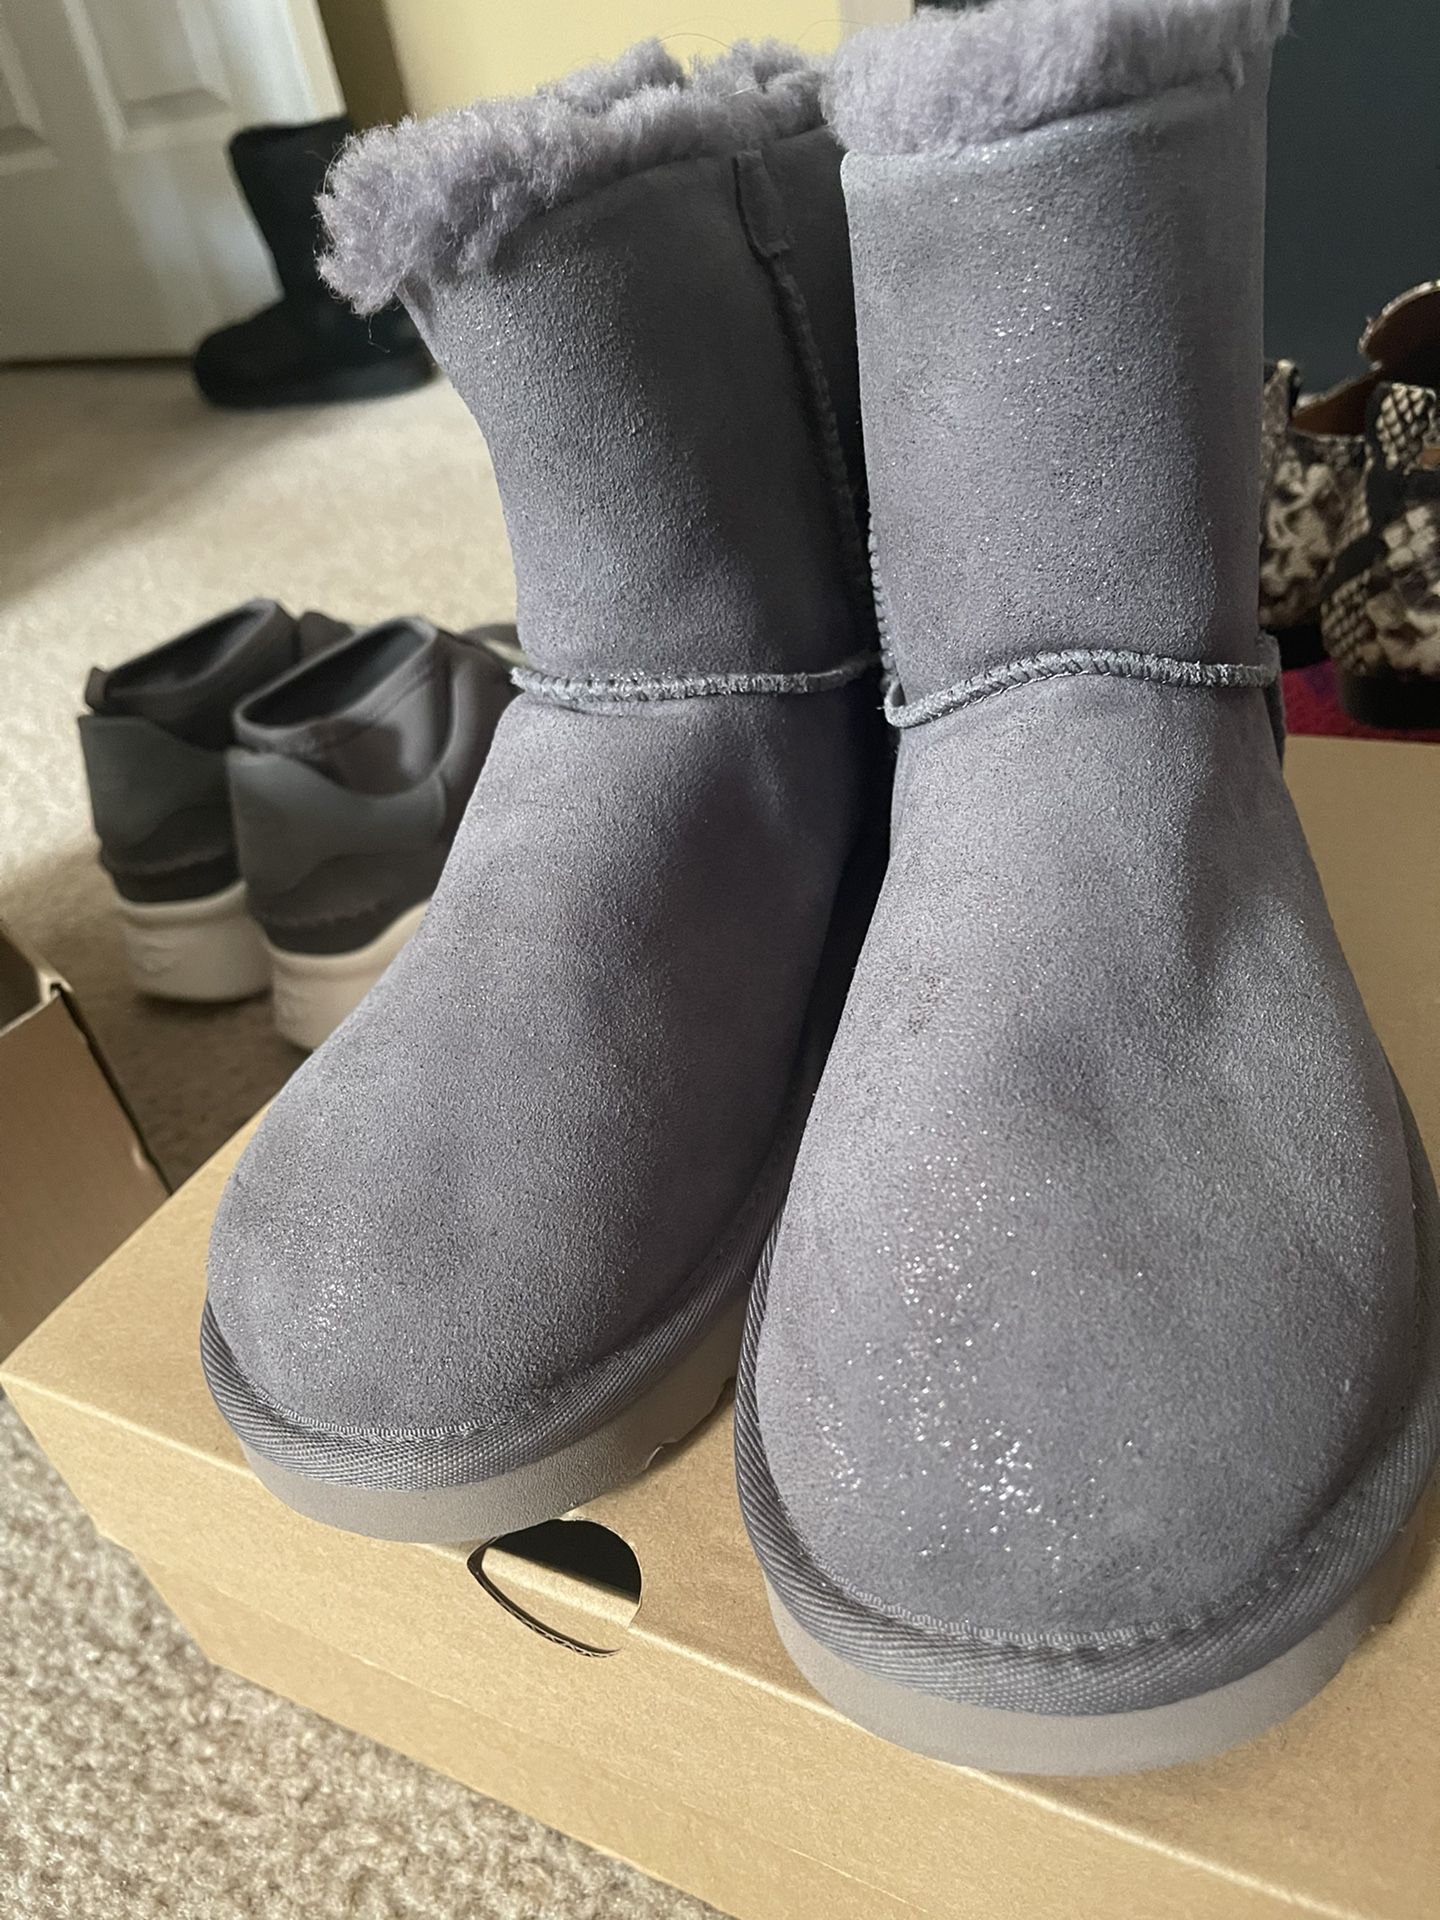 Size 9 UGG Boots 